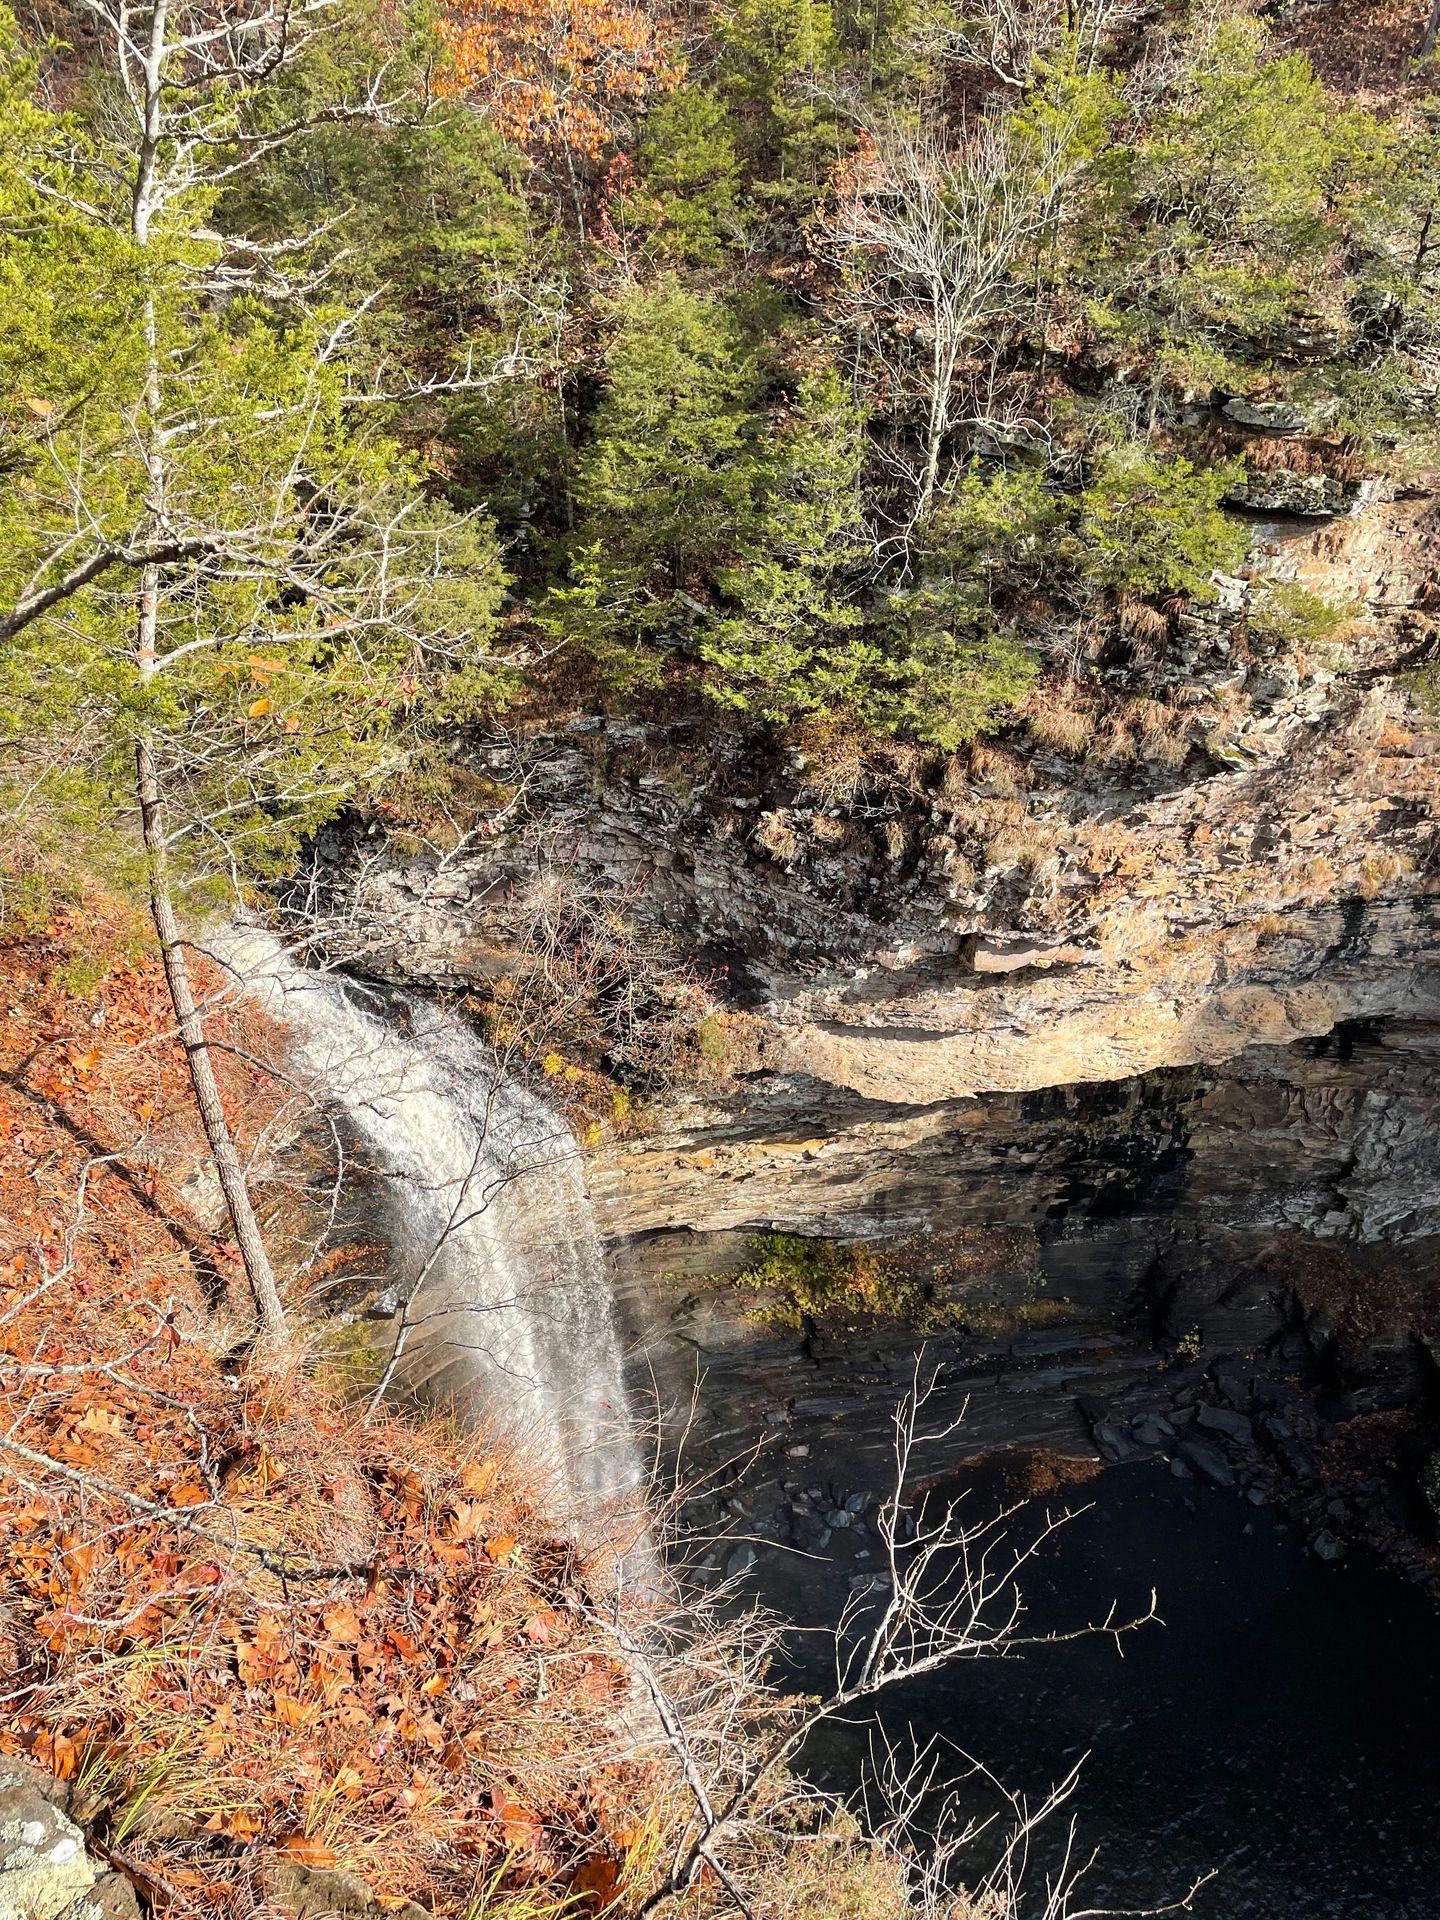 Looking down at the Cedar Falls waterfall. The view is partially obstructed by trees.